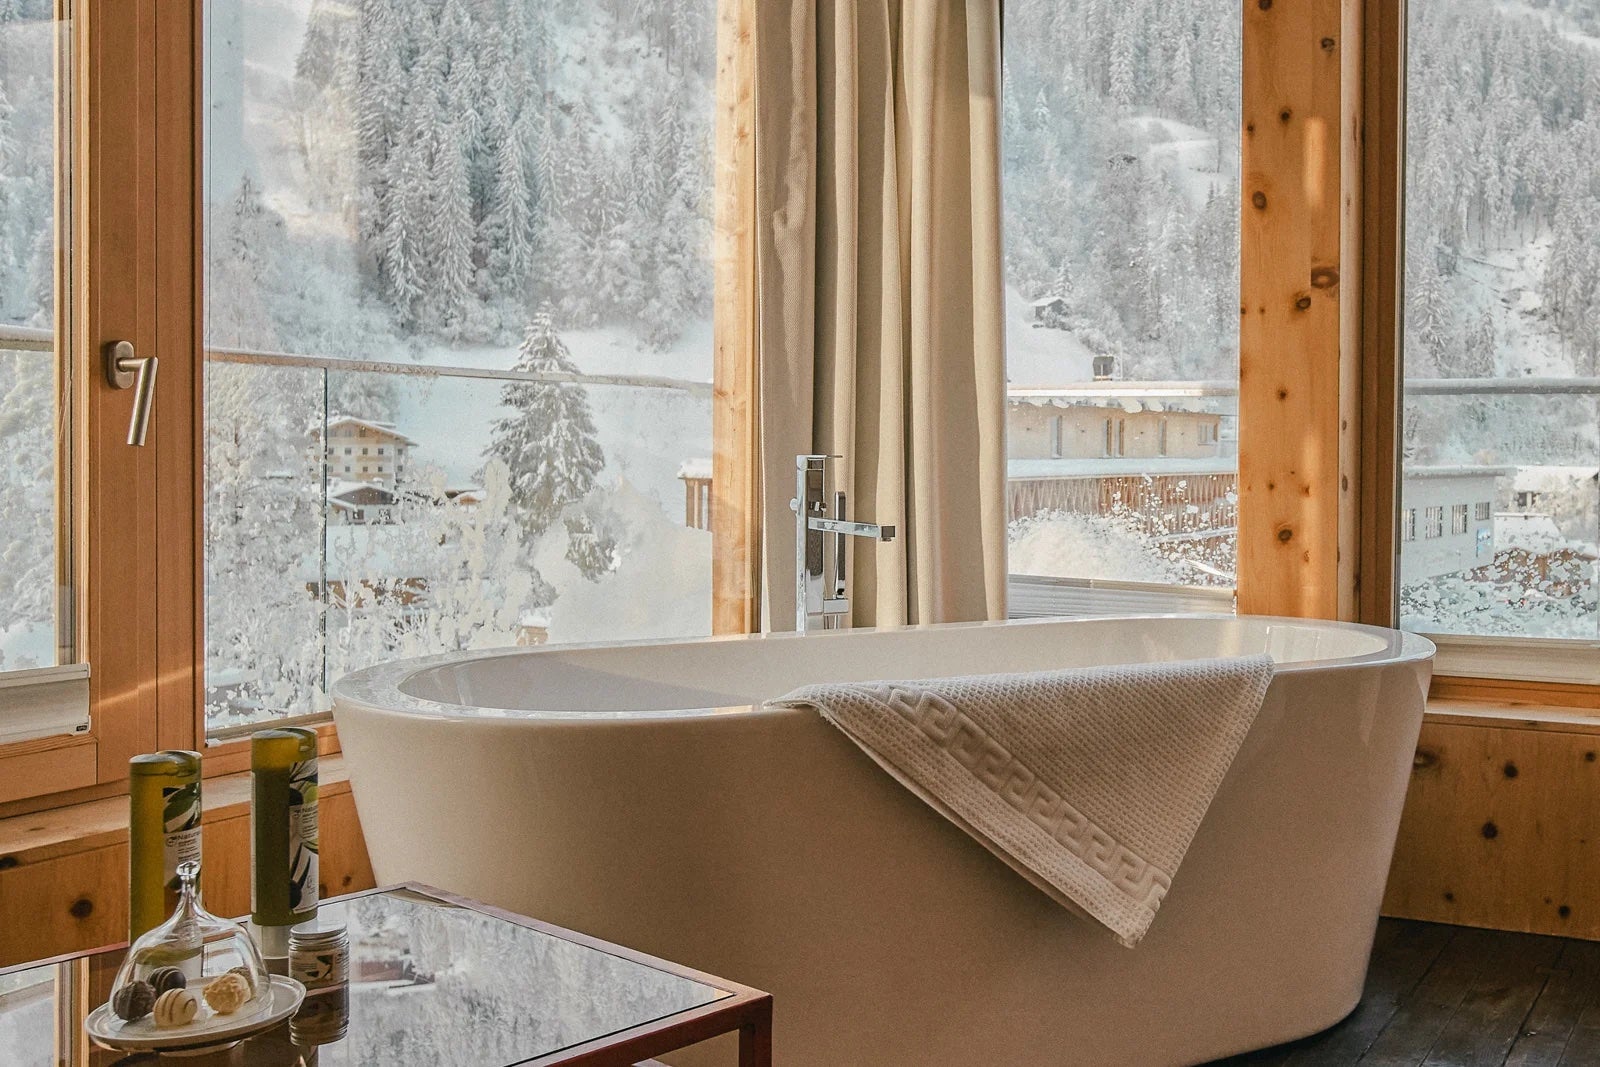 11 of the best points hotels in Europe for a snowy winter holiday